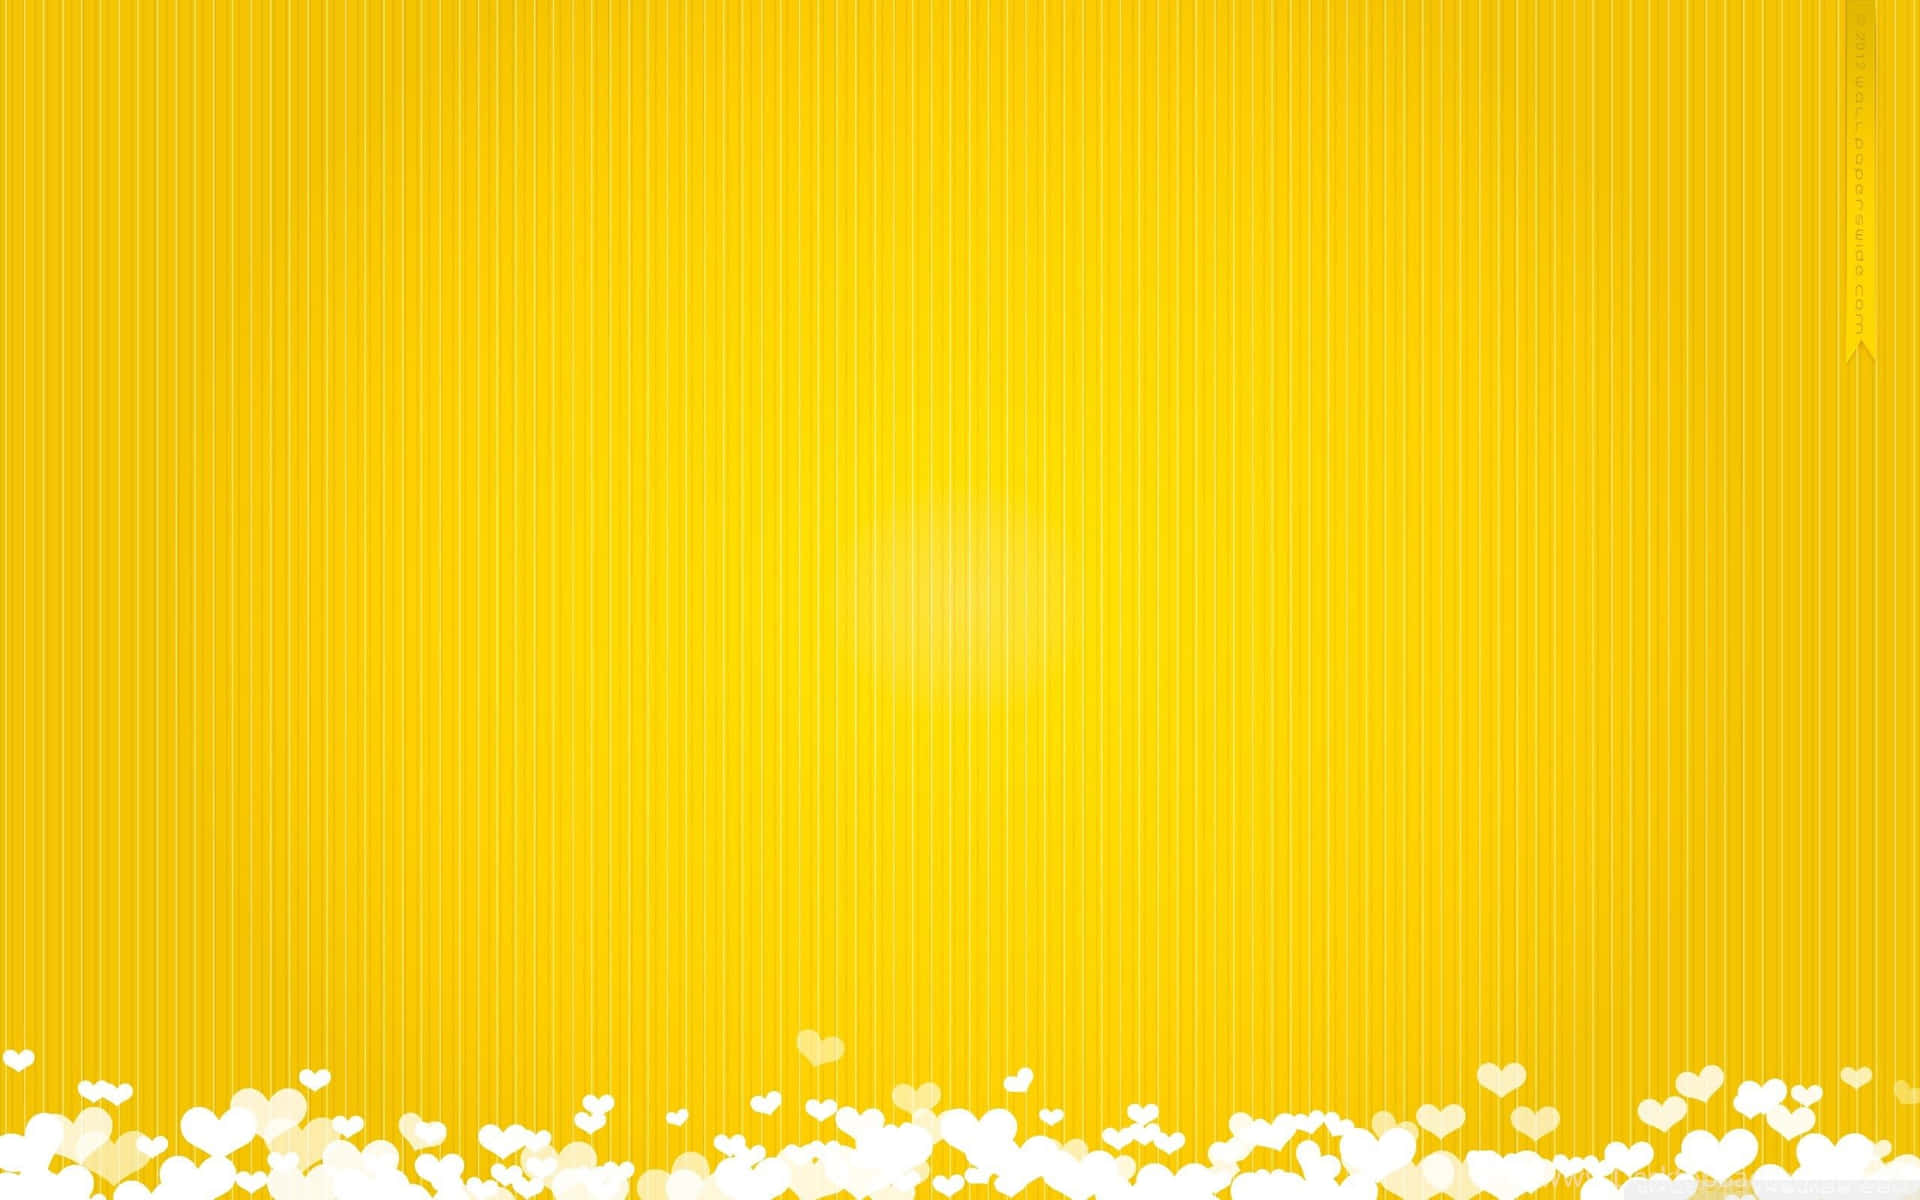 A Yellow Background With Hearts On It Wallpaper